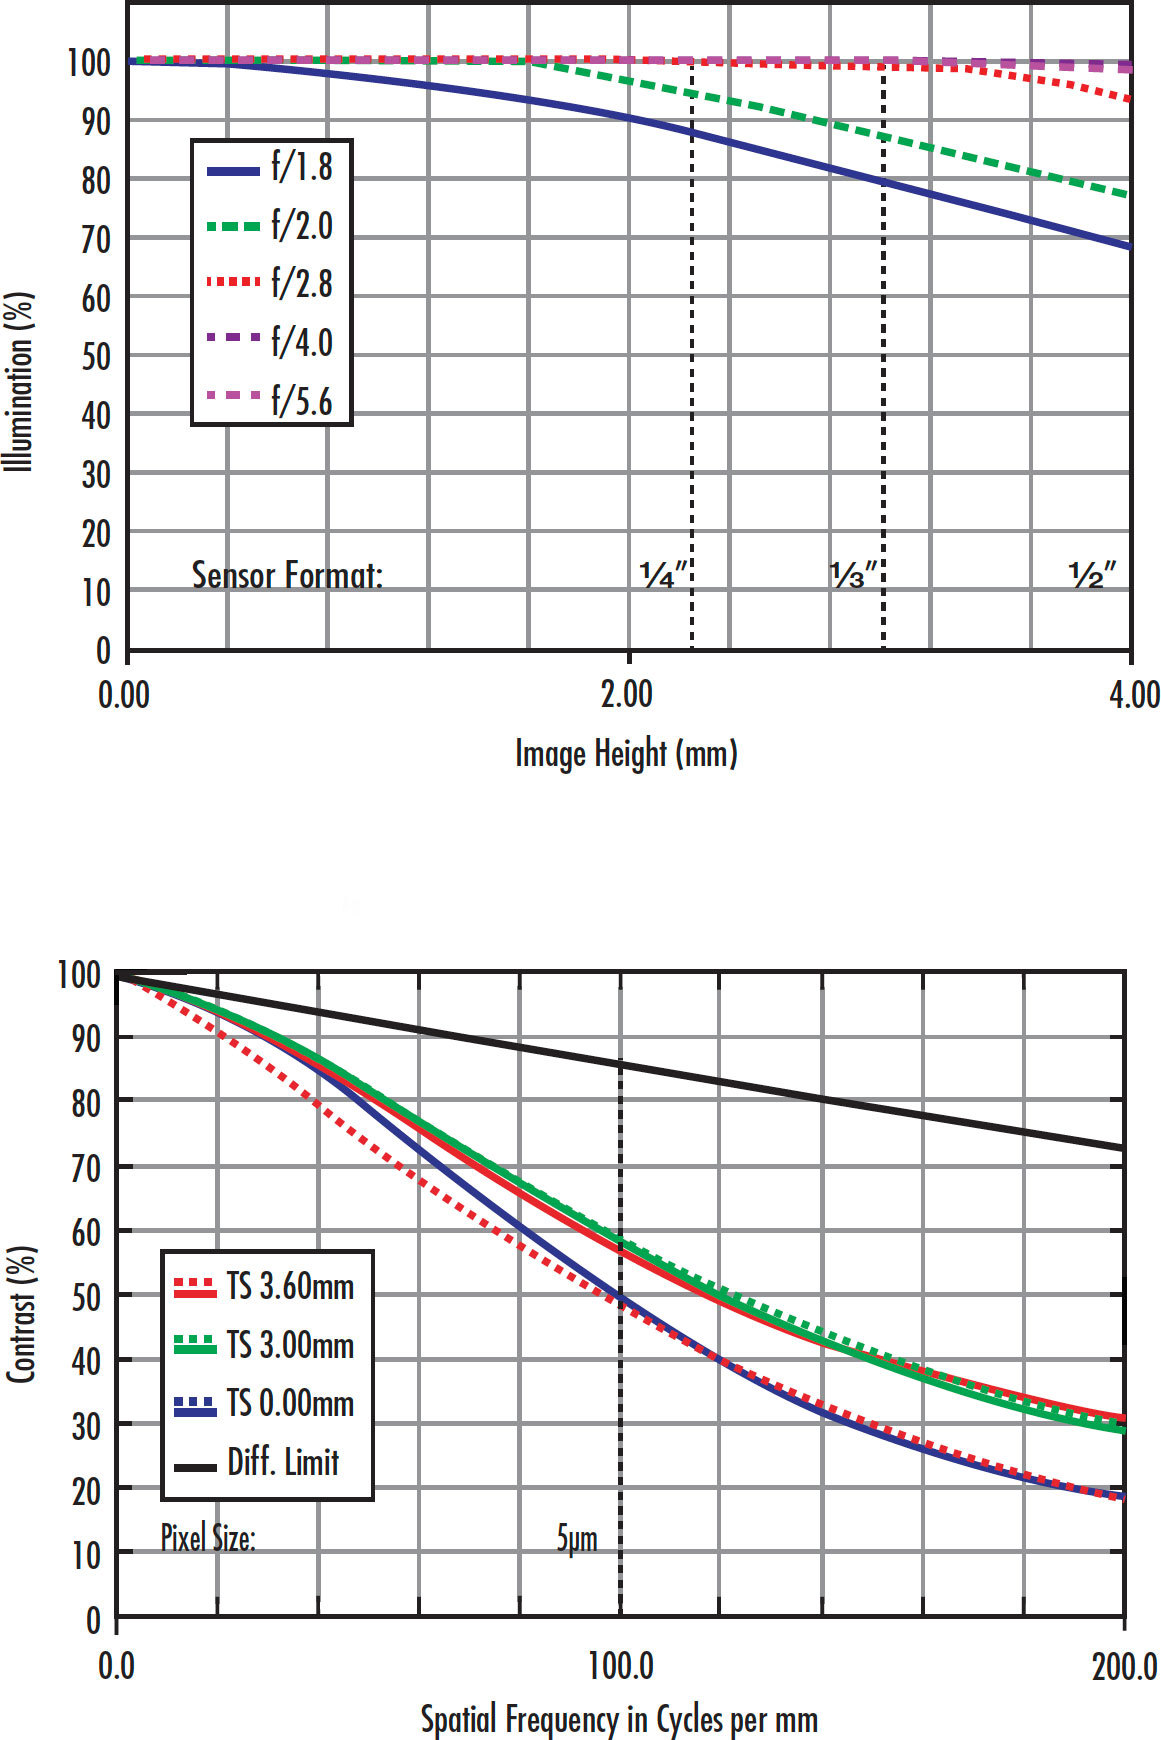 Figure 1: A high resolution 25mm lens’s MTF at different settings, reinforcing the importance of comparing the specific lens curves.